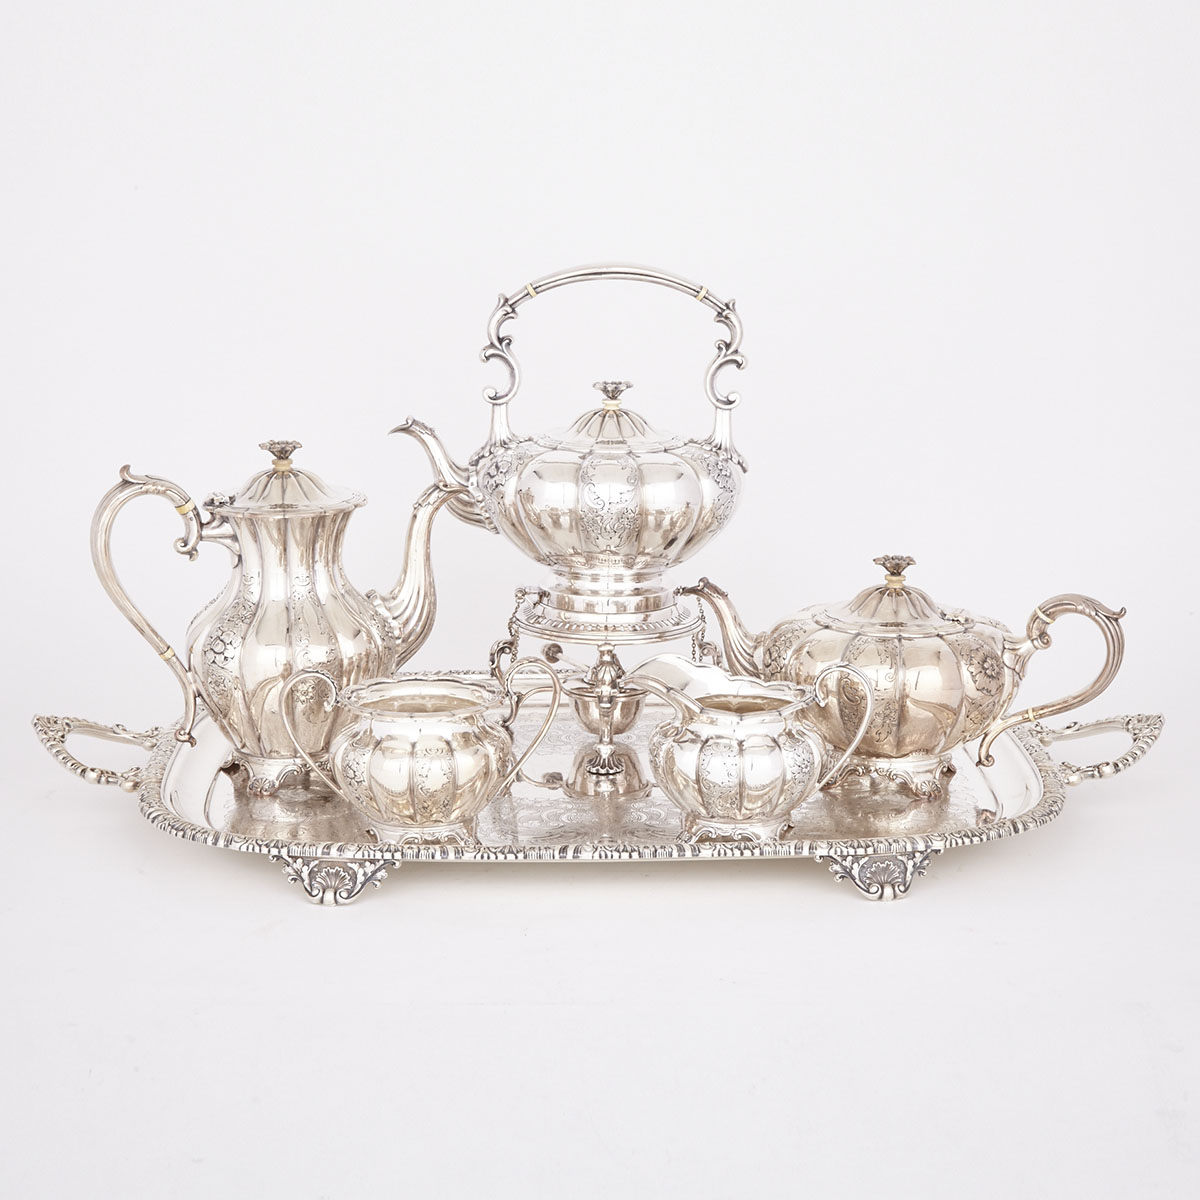 English Silver Plated Tea and Coffee Service, Charles Howard Collins, 20th century